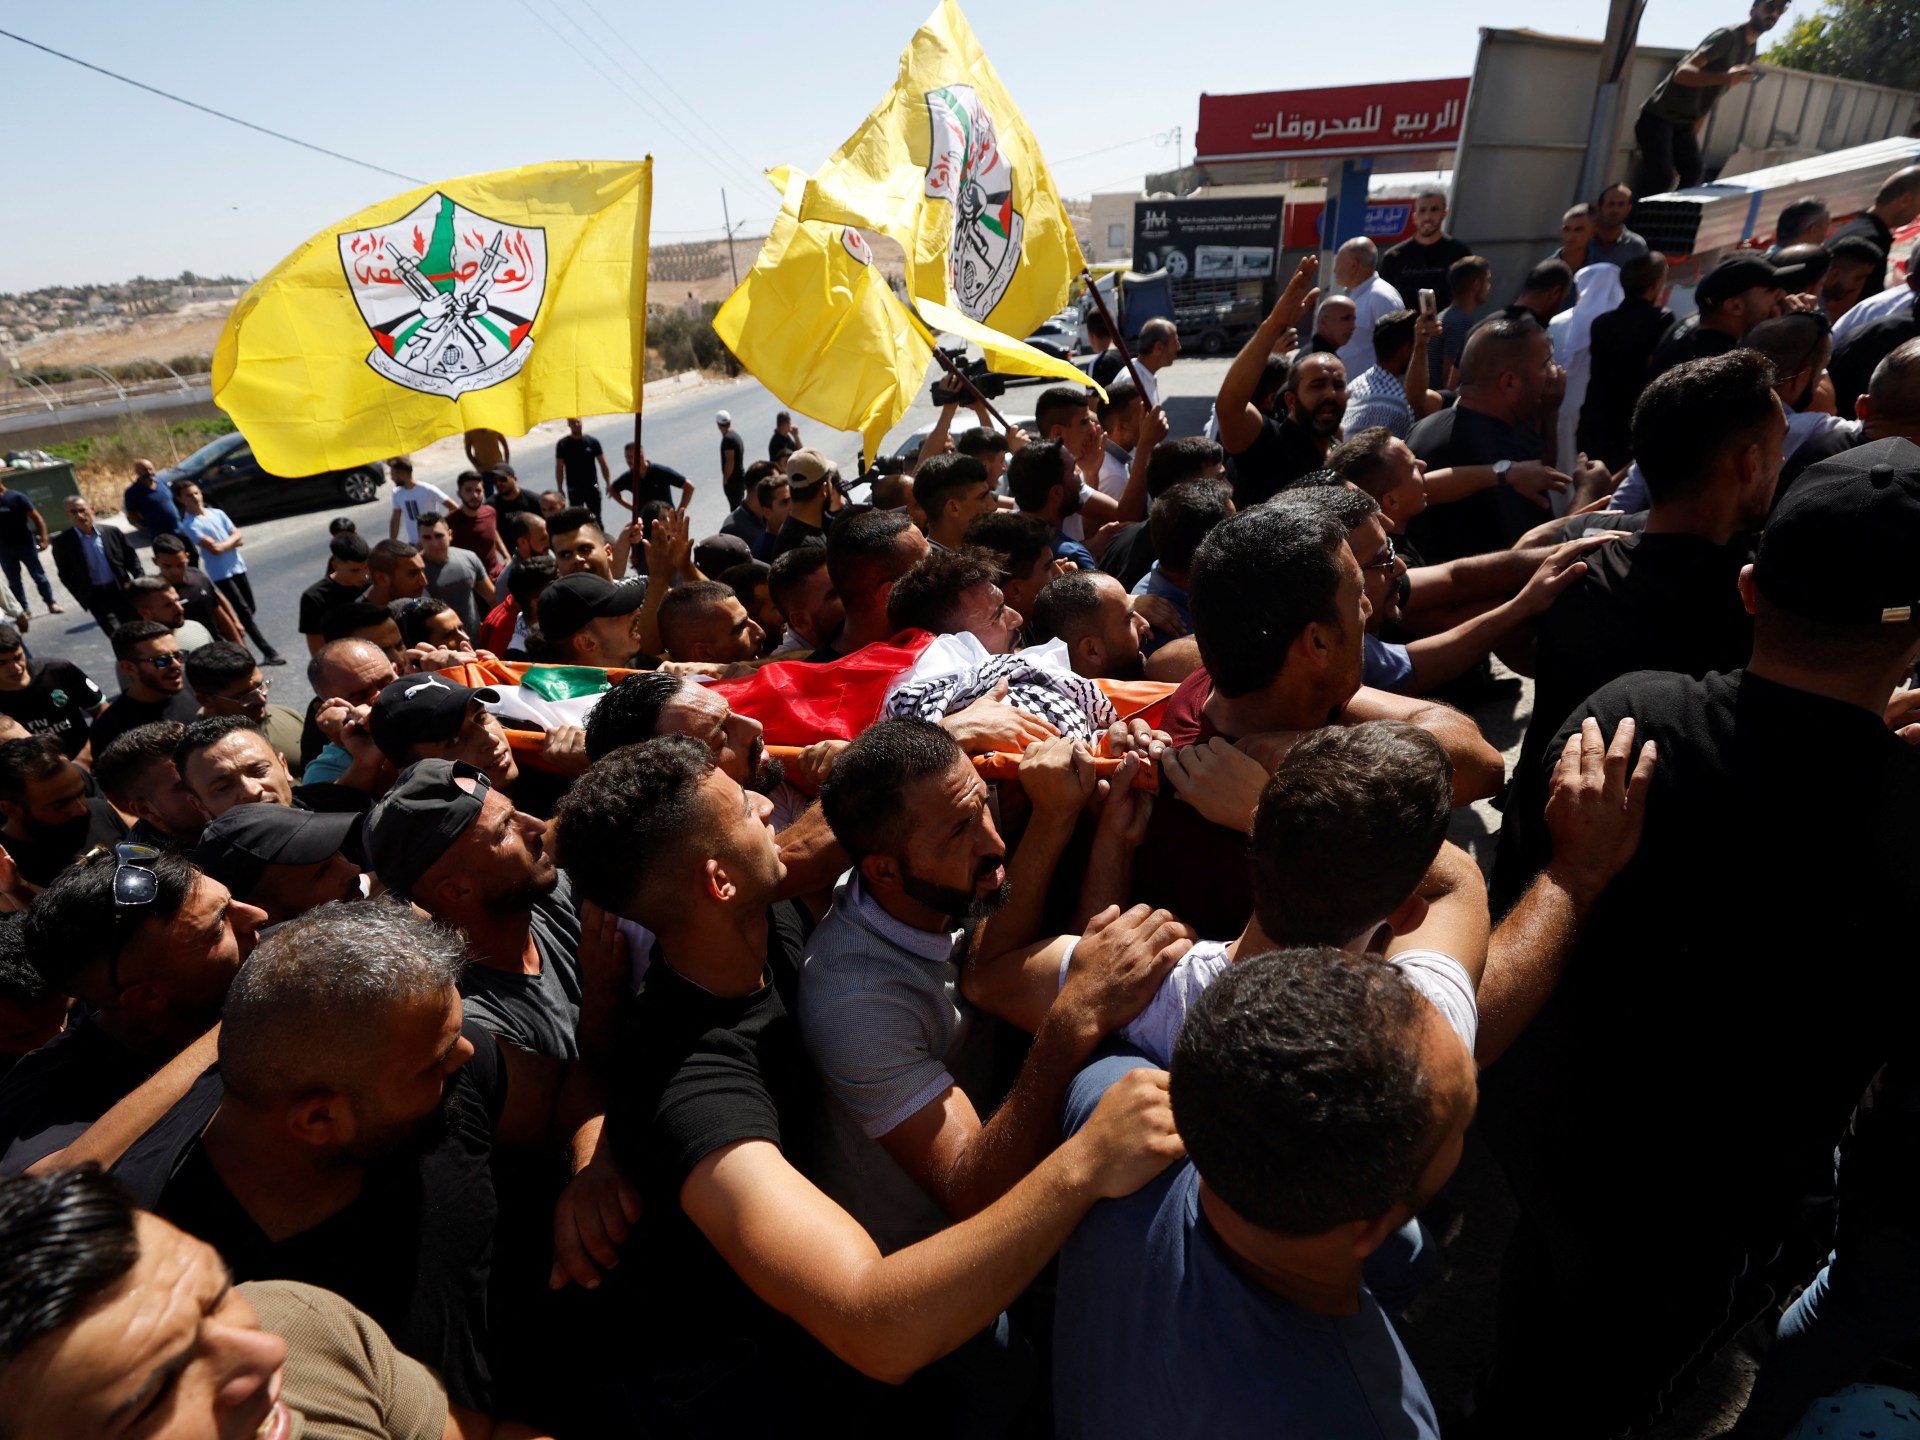 palestinians-mourn-boy-7-who-died-from-fear-of-israeli-forces